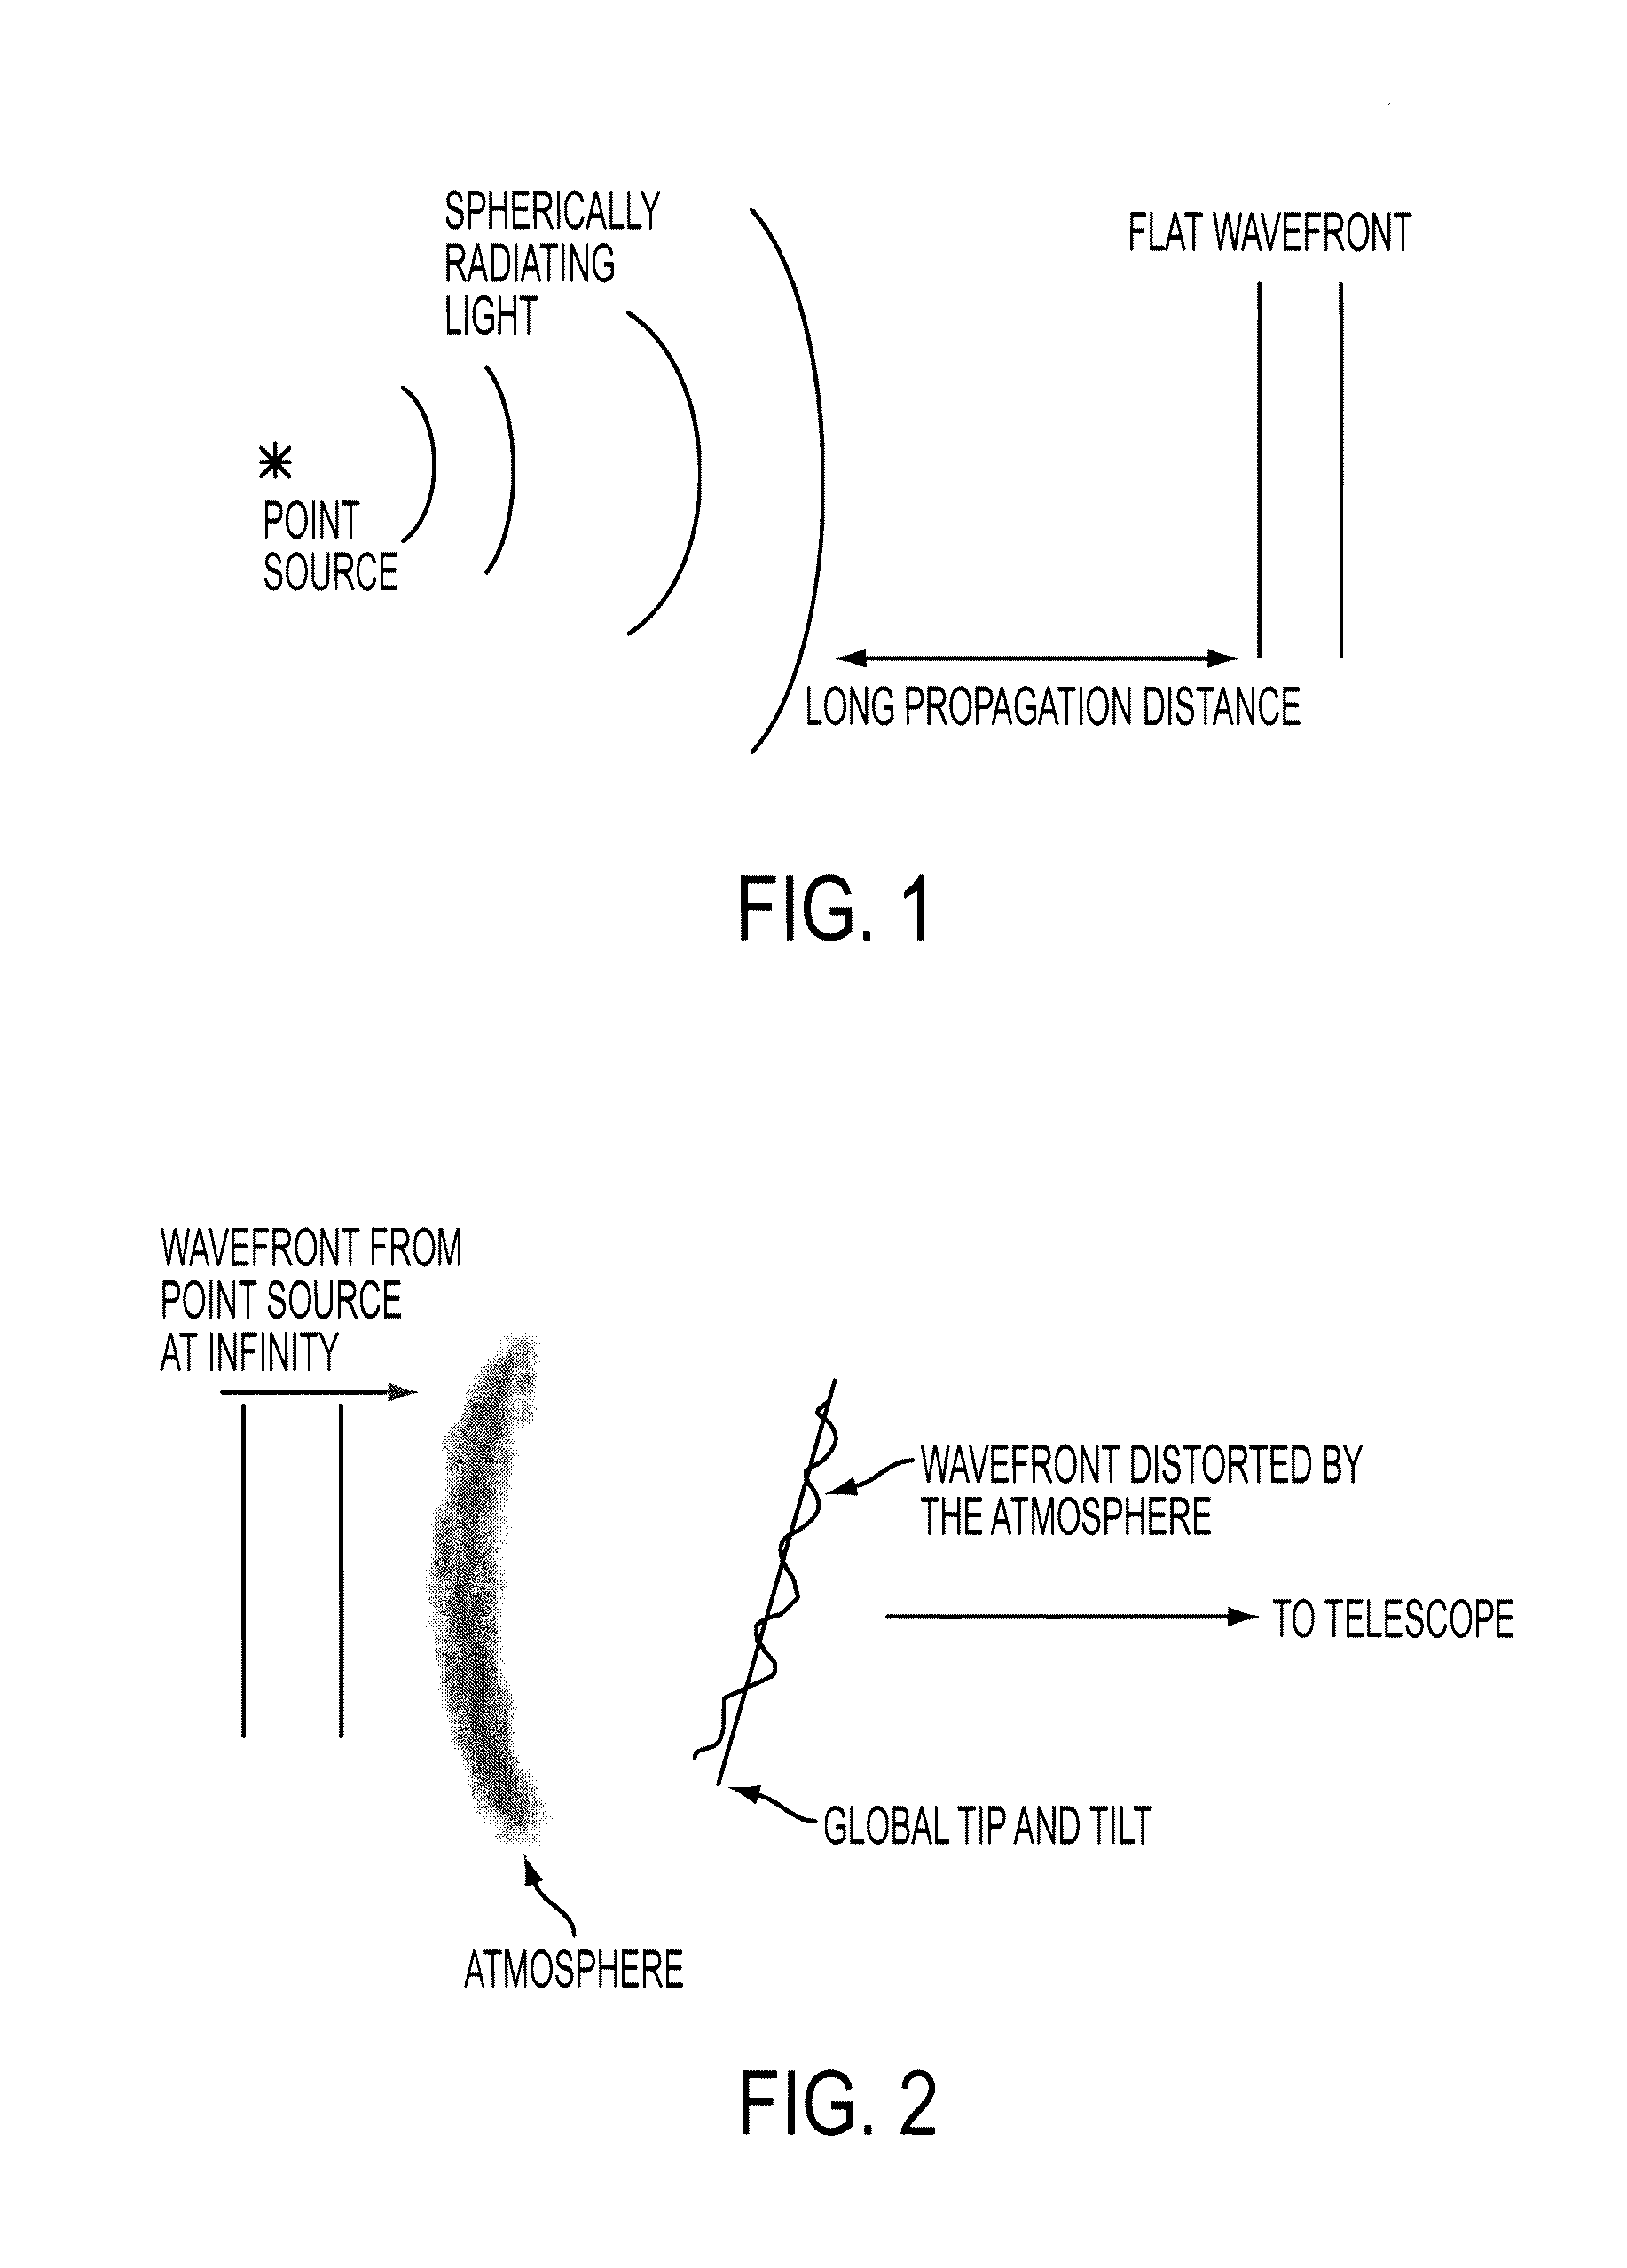 System and Method of Generating Atmospheric Turbulence for Testing Adaptive Optical Systems